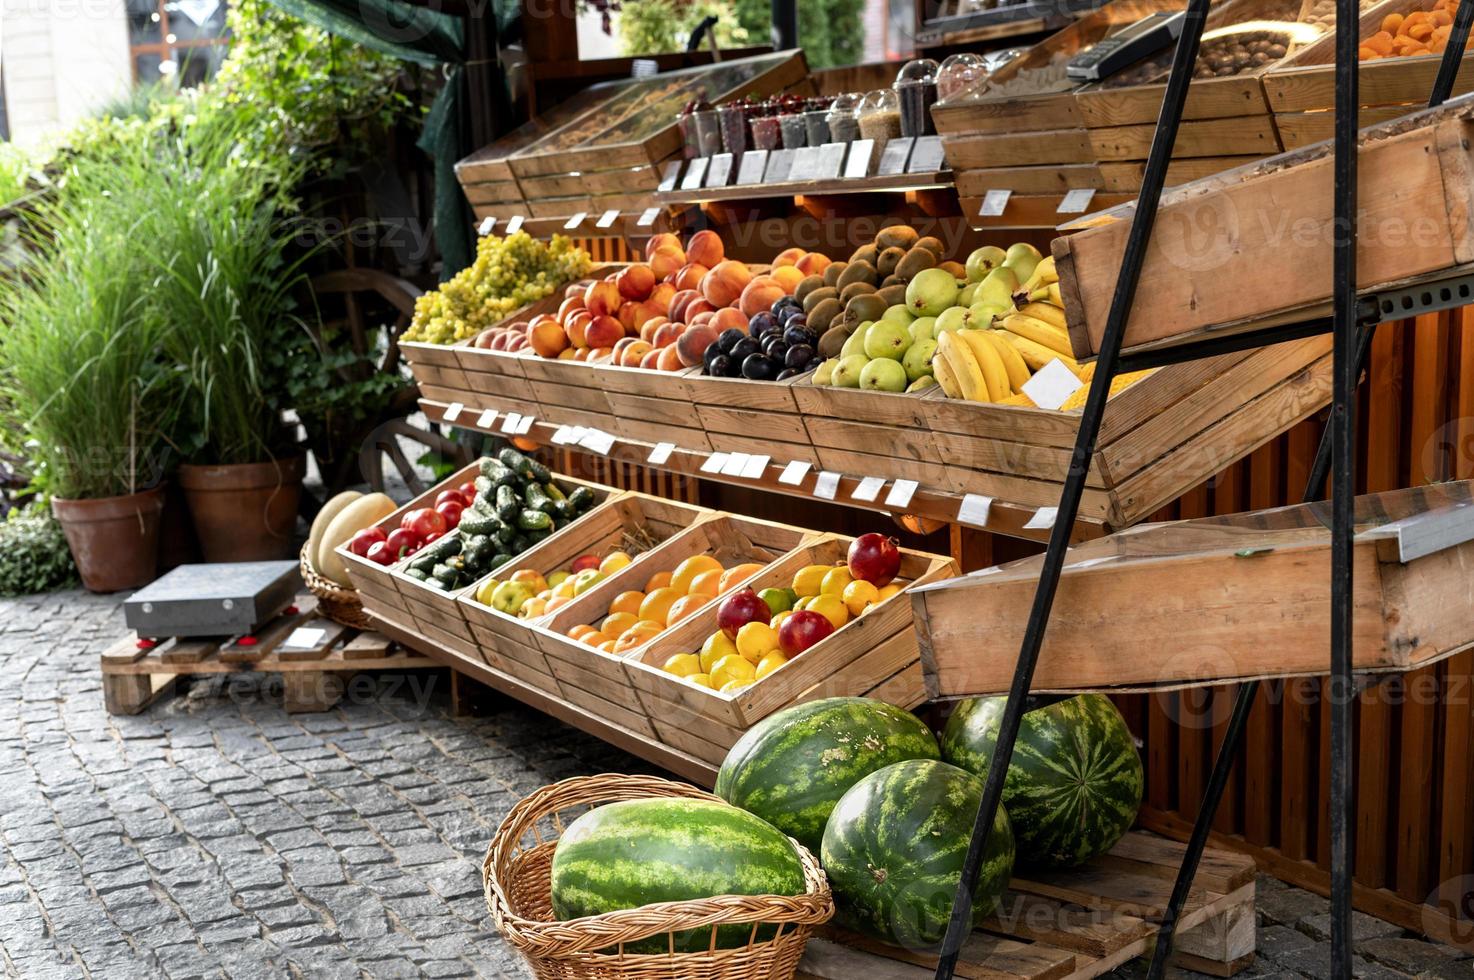 Fruit stand at a street market outside with organic watermelons, oranges, lemons in wooden crates small business vegan healthy food photo